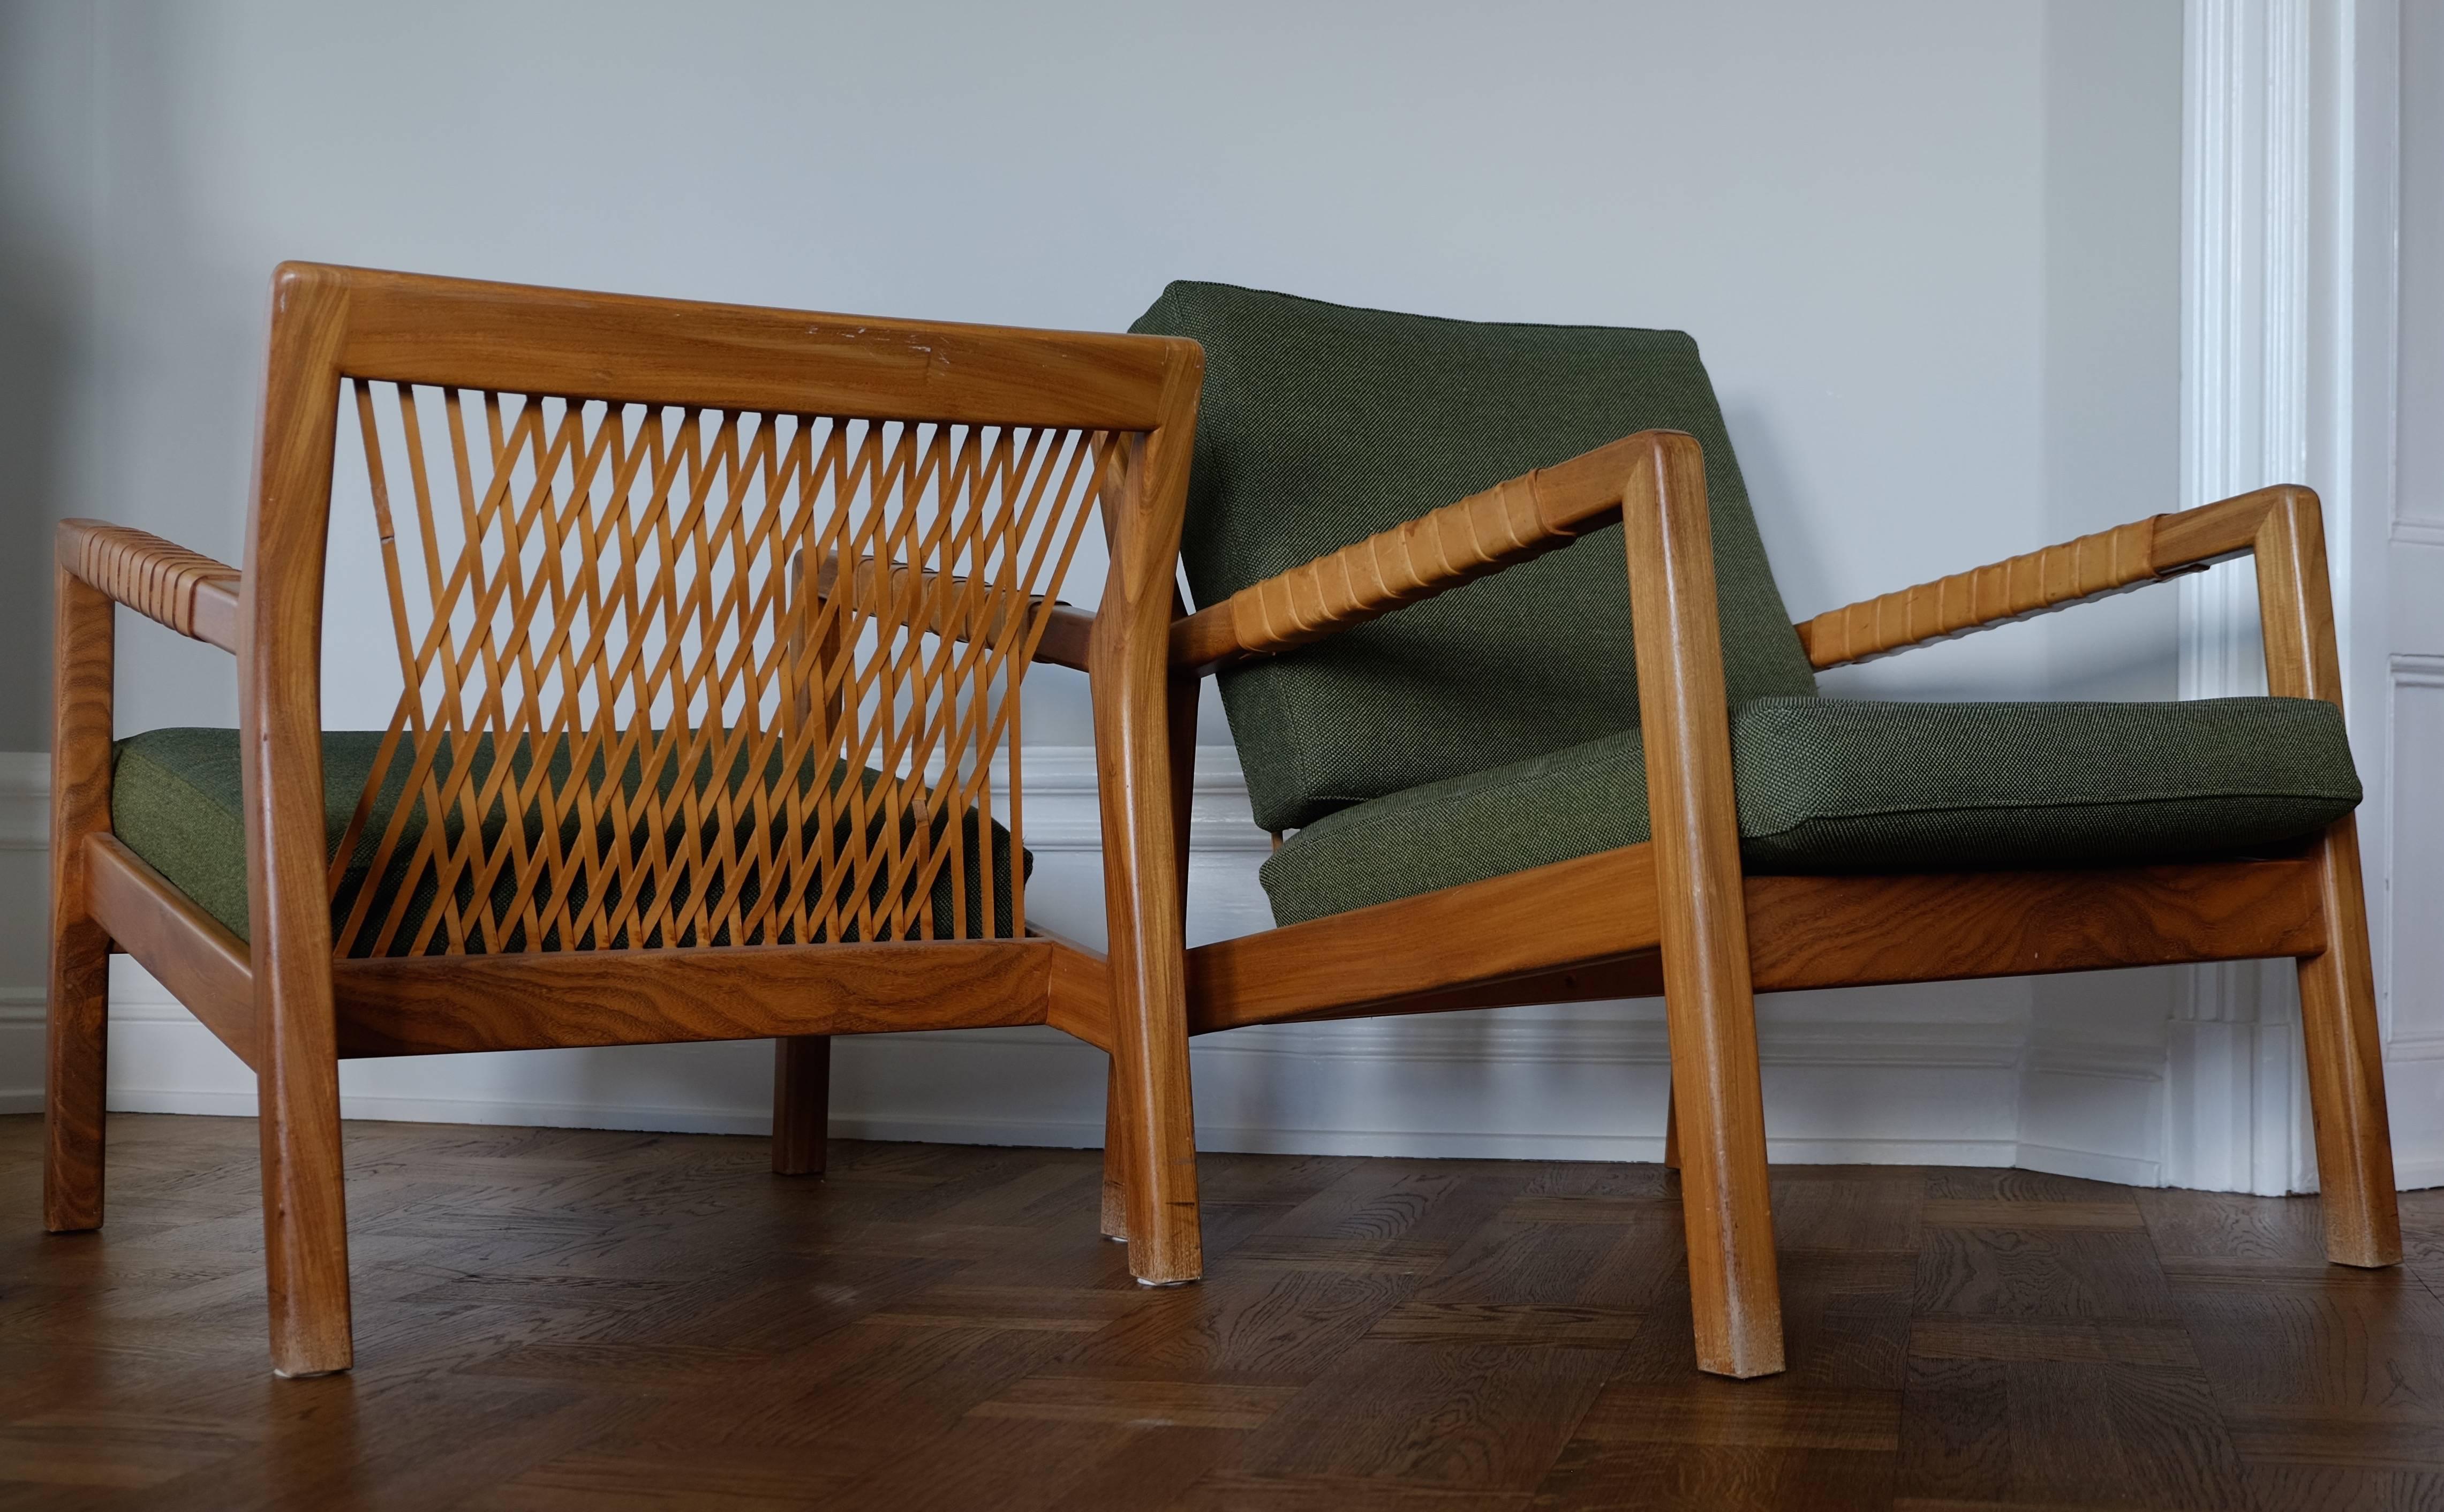 Very rare armchairs by Carl-Gustav Hiort af Ornäs, Finland, 1950s.
Walnut, leather covered armrests, back with braided leather straps, loose cushions upholstered in green fabric.